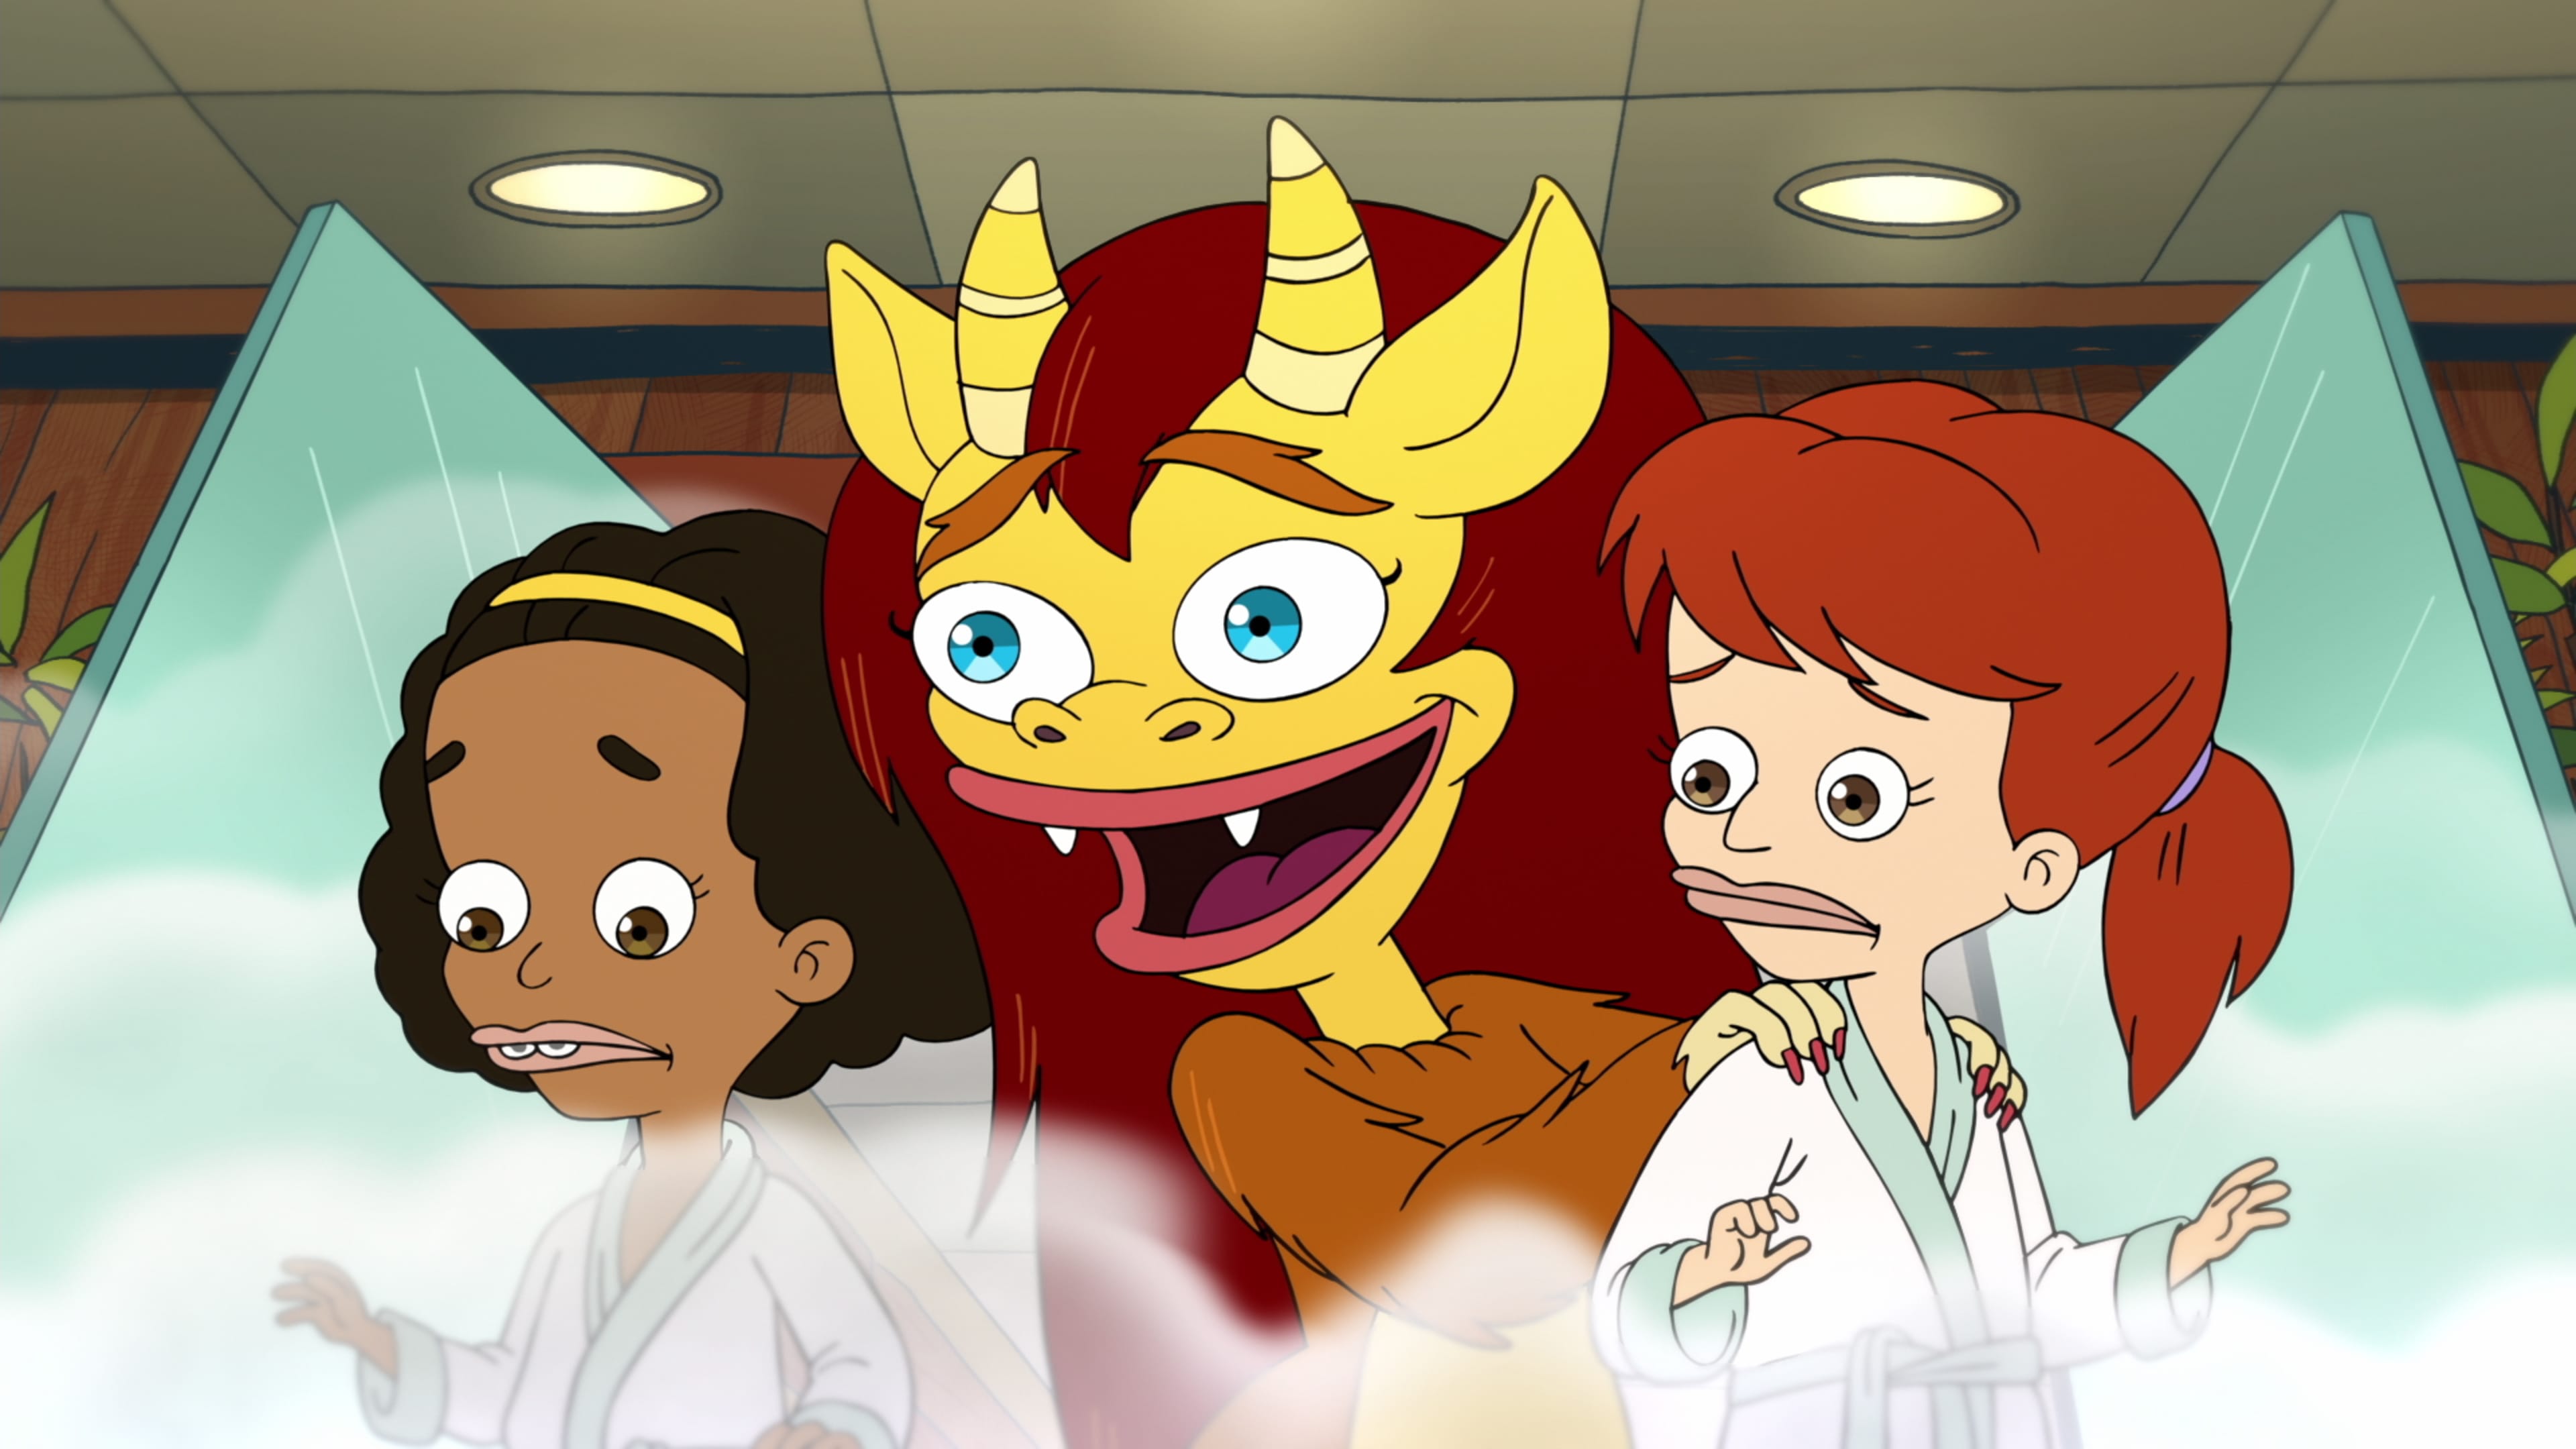 Big Mouth 4k Ultra HD Wallpaper. Background Imagex2160